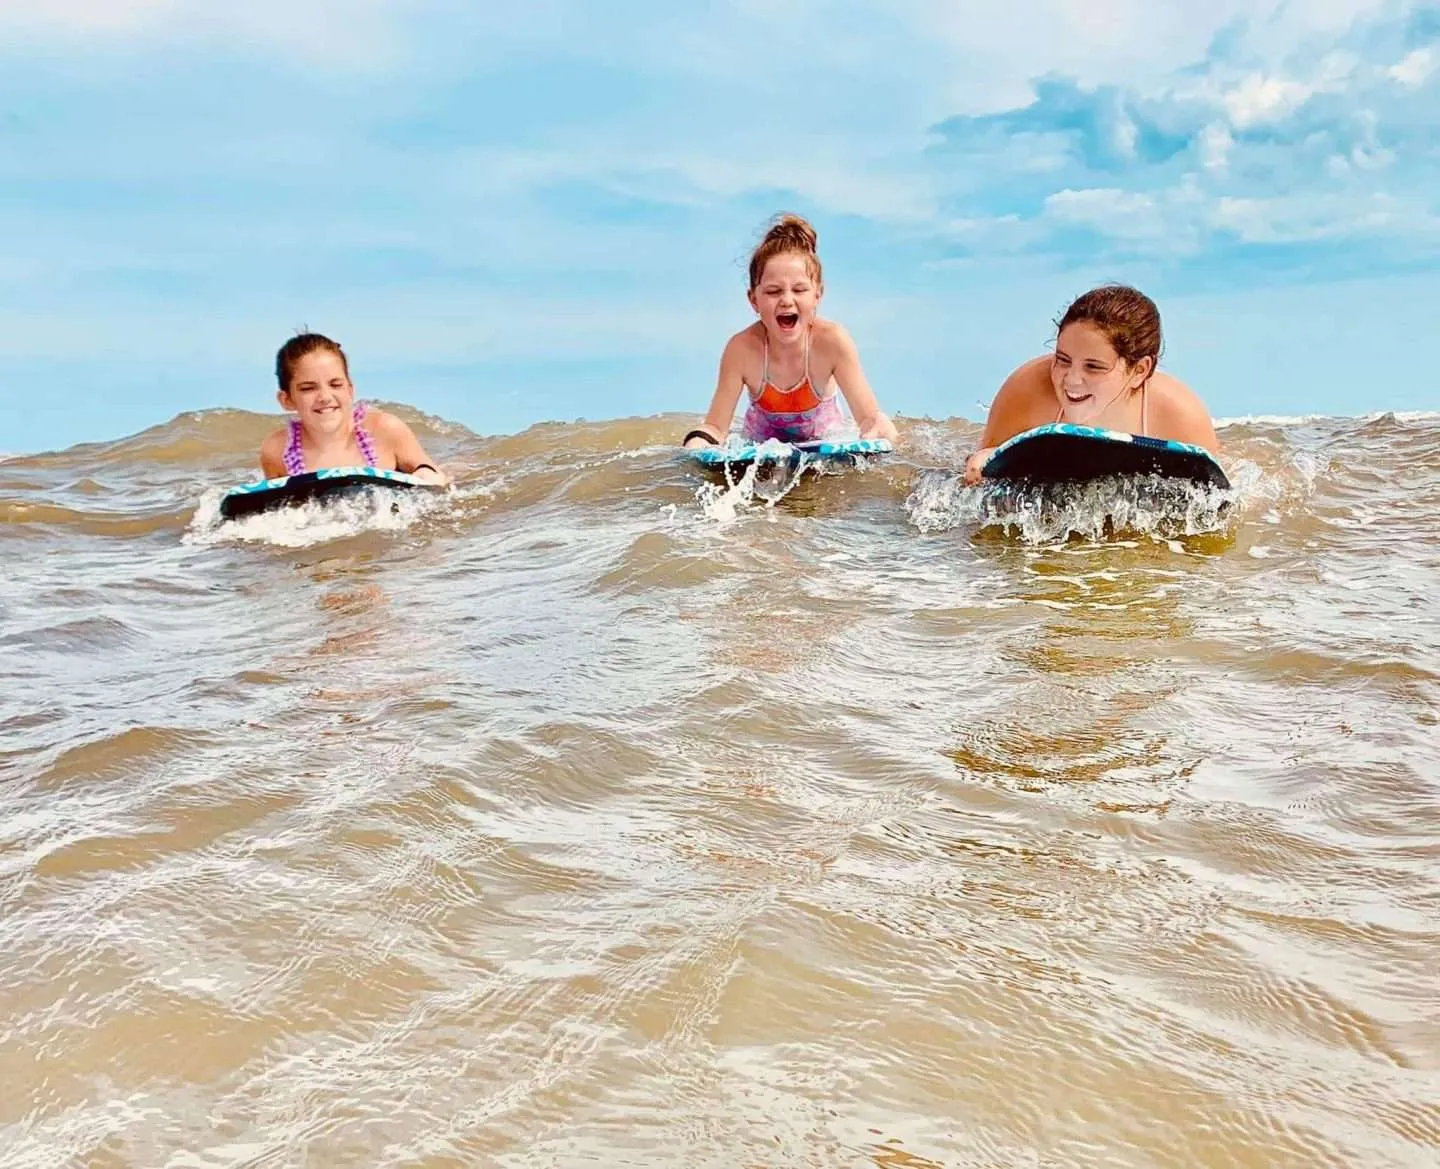 Girls riding boogie boards at the beach in Galveston, TX.